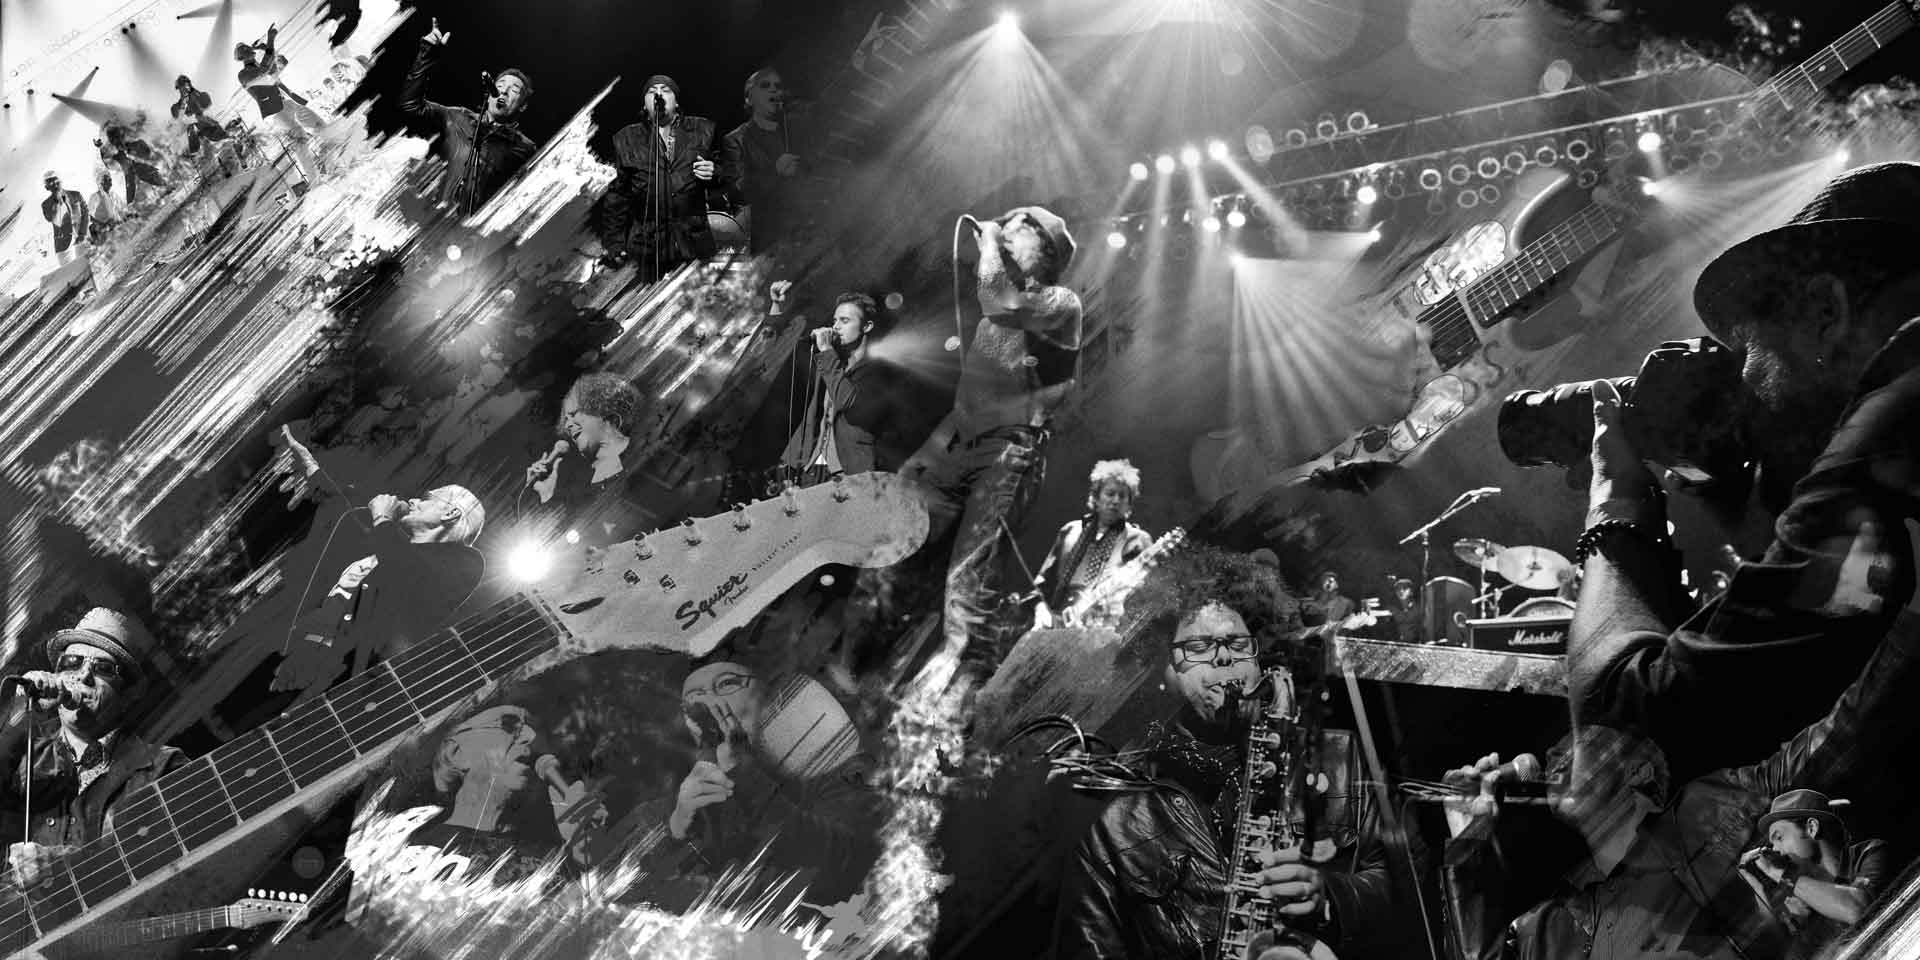 A black and white photo of people in the middle of a concert.